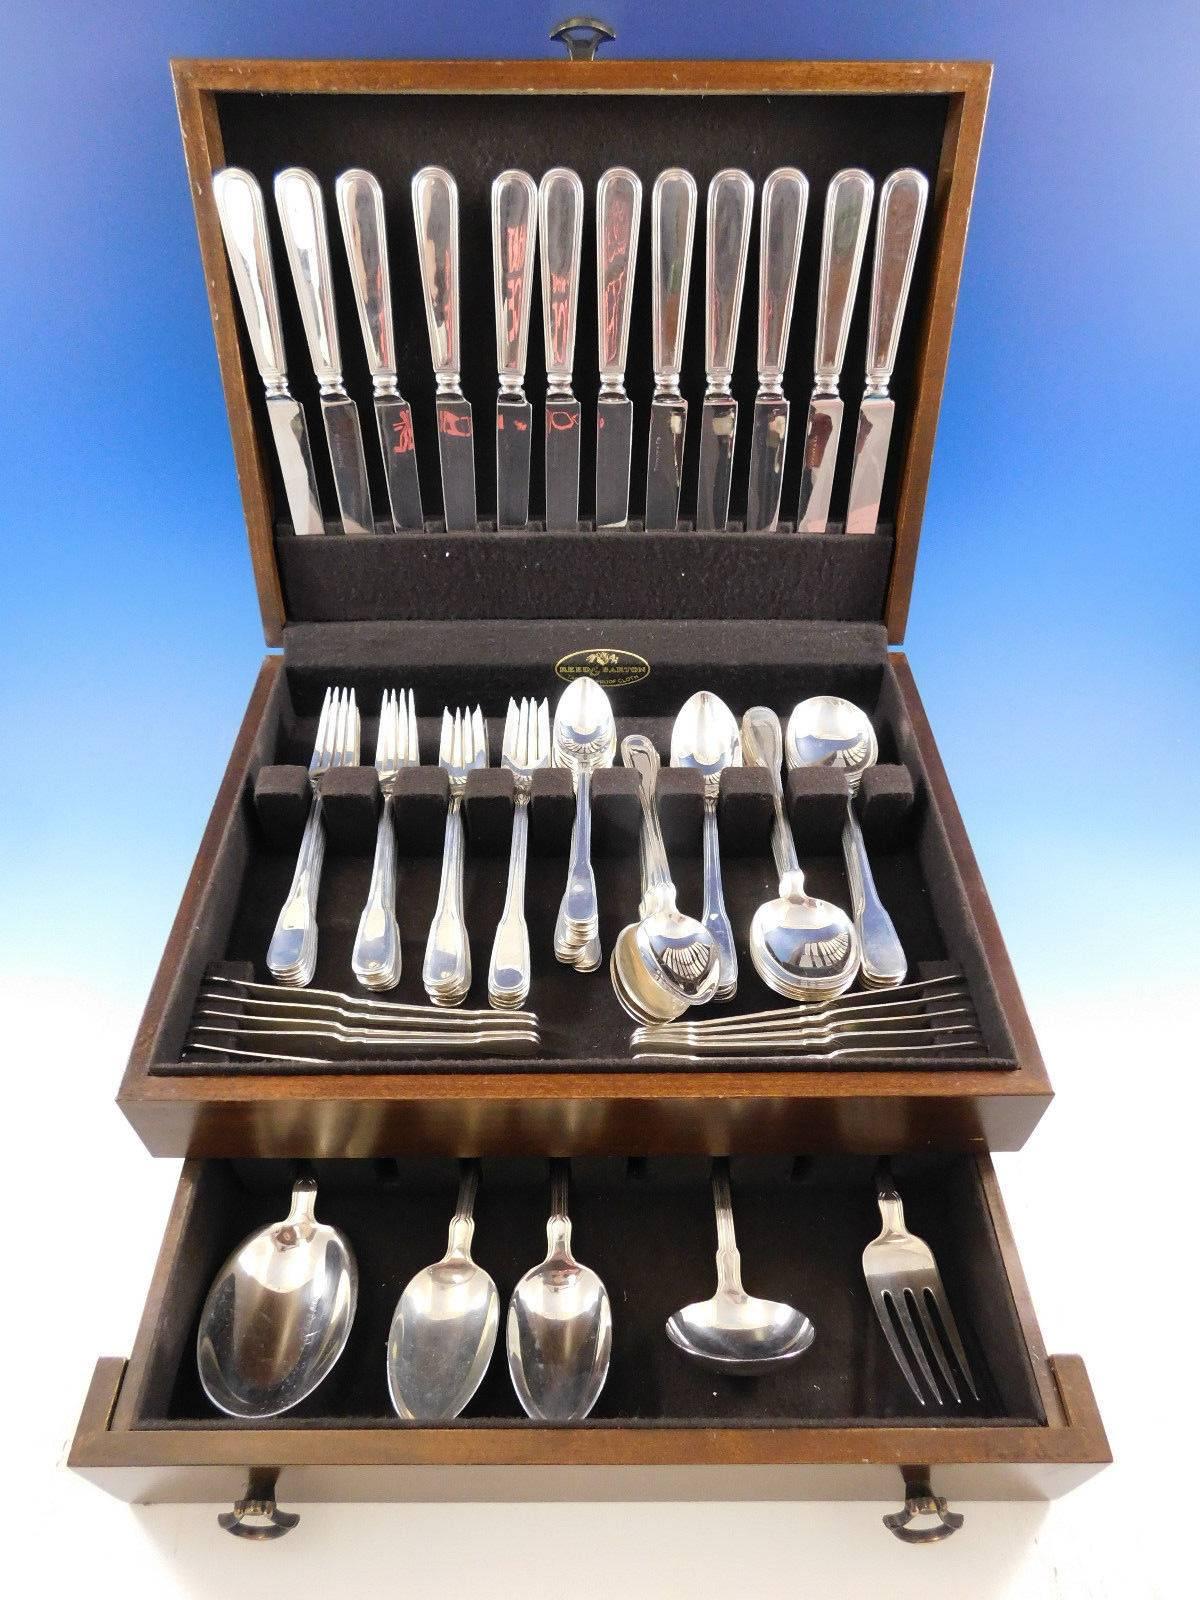 Hamilton by Tiffany and Co. sterling silver flatware set, 89 pieces. This set includes: 12 regular luncheon size knives, 9 1/4